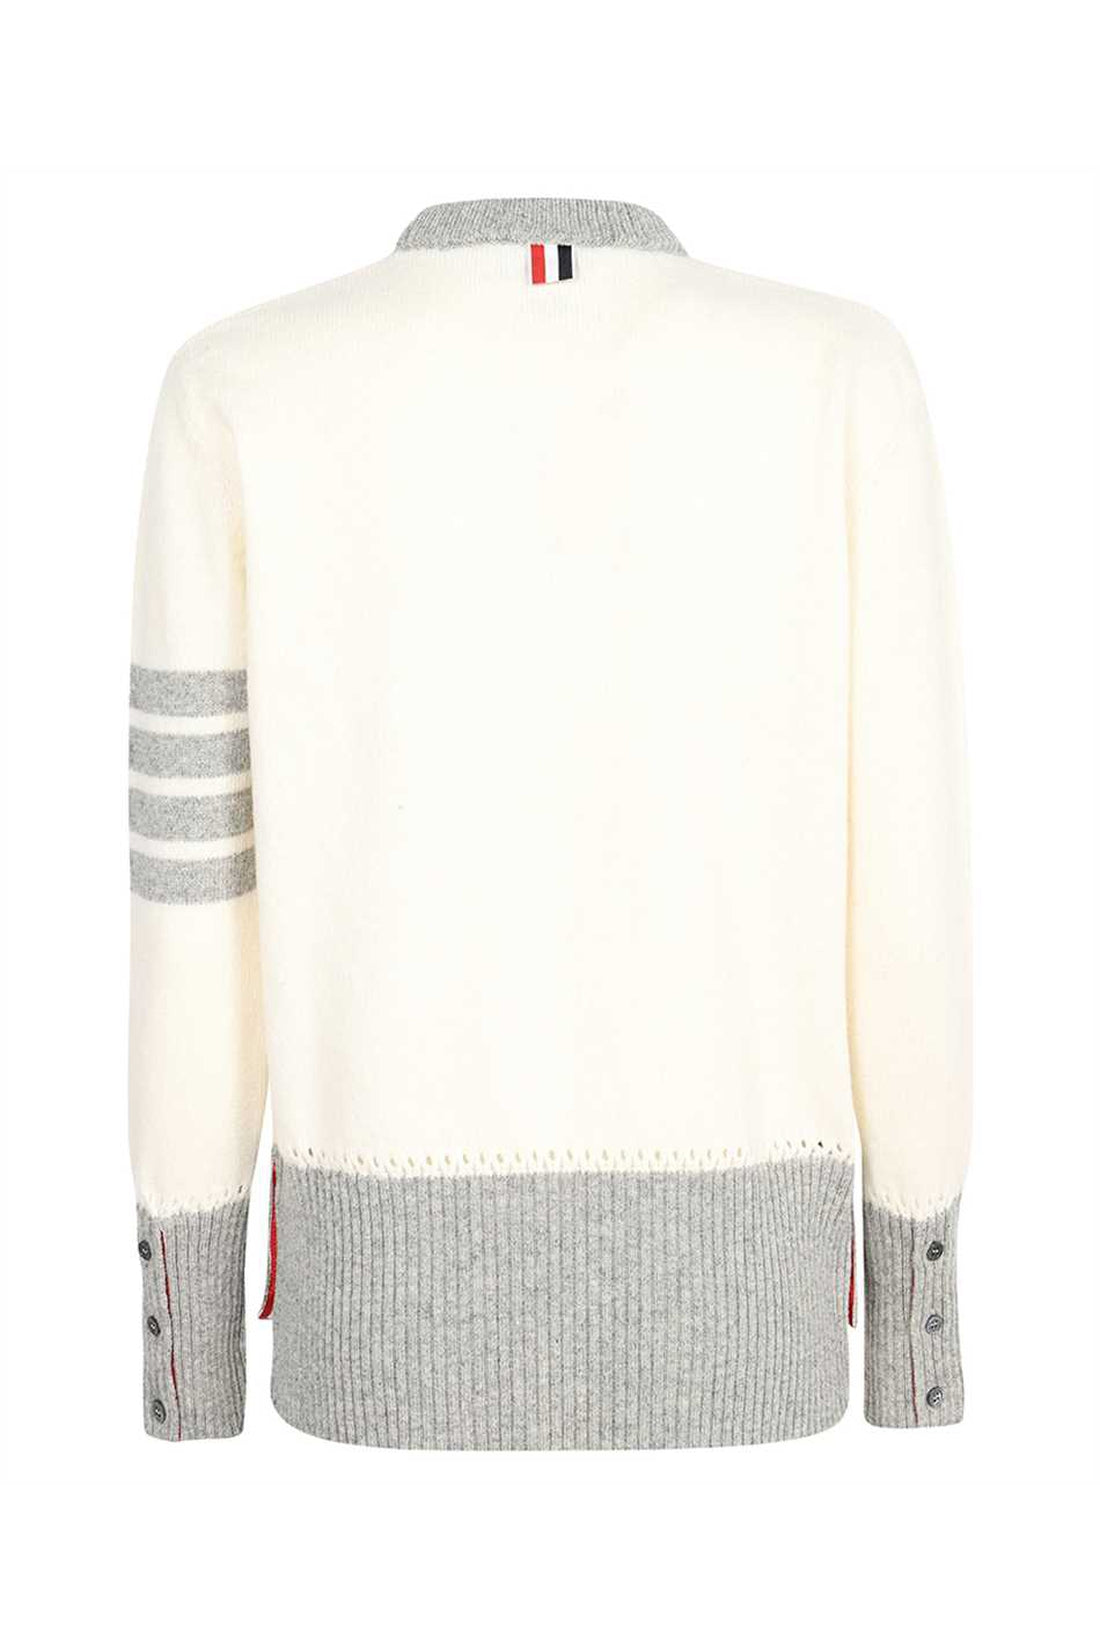 Thom Browne-OUTLET-SALE-Wool oversize sweater-ARCHIVIST